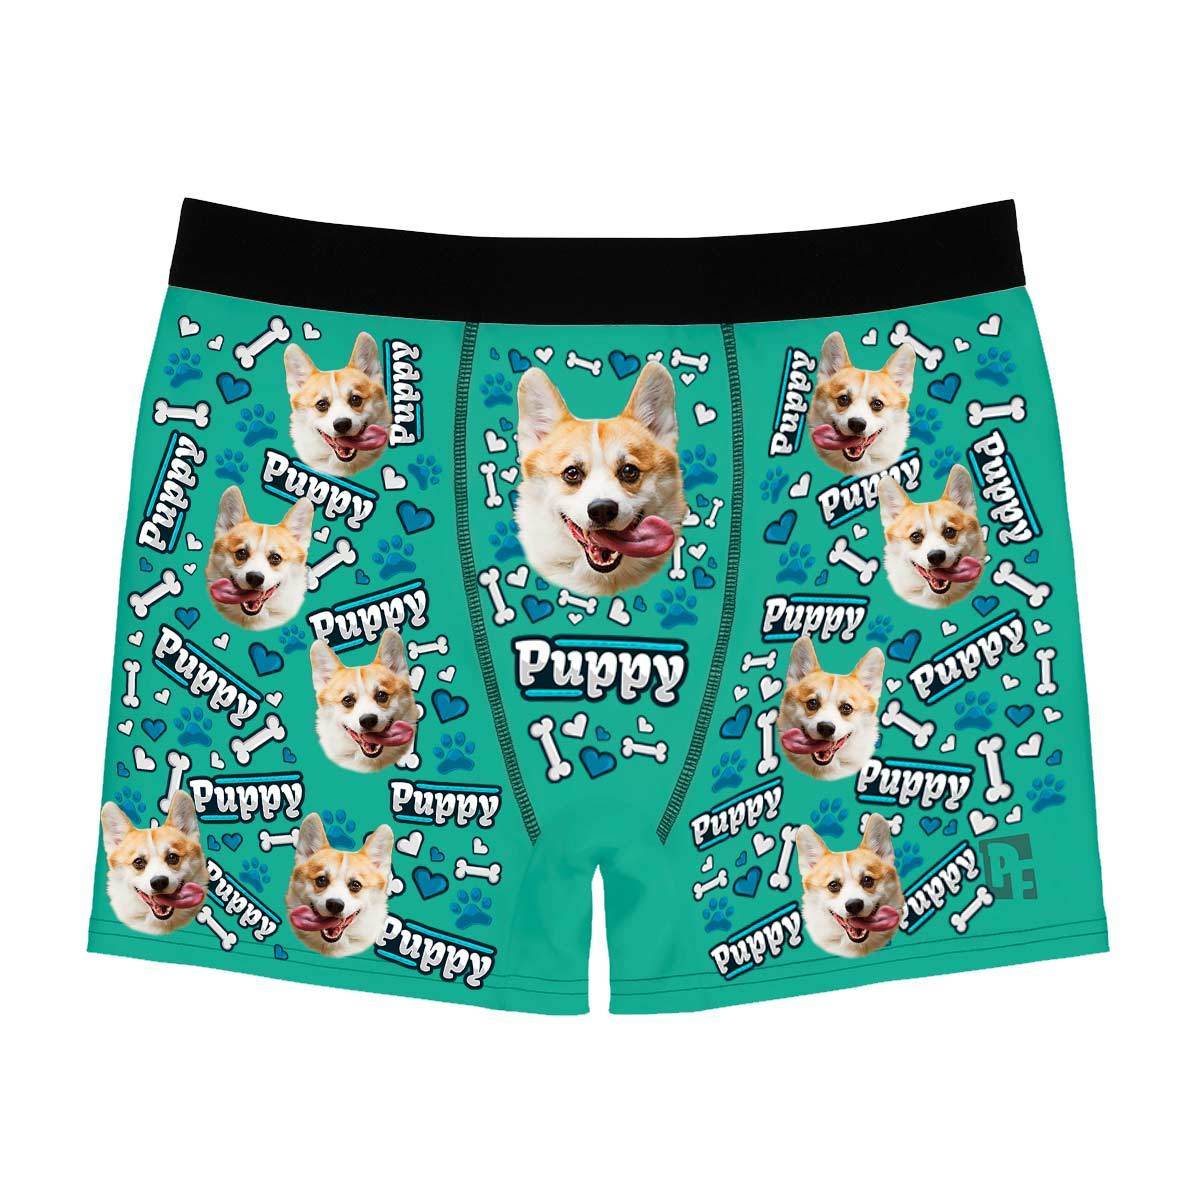 Mint Puppy men's boxer briefs personalized with photo printed on them